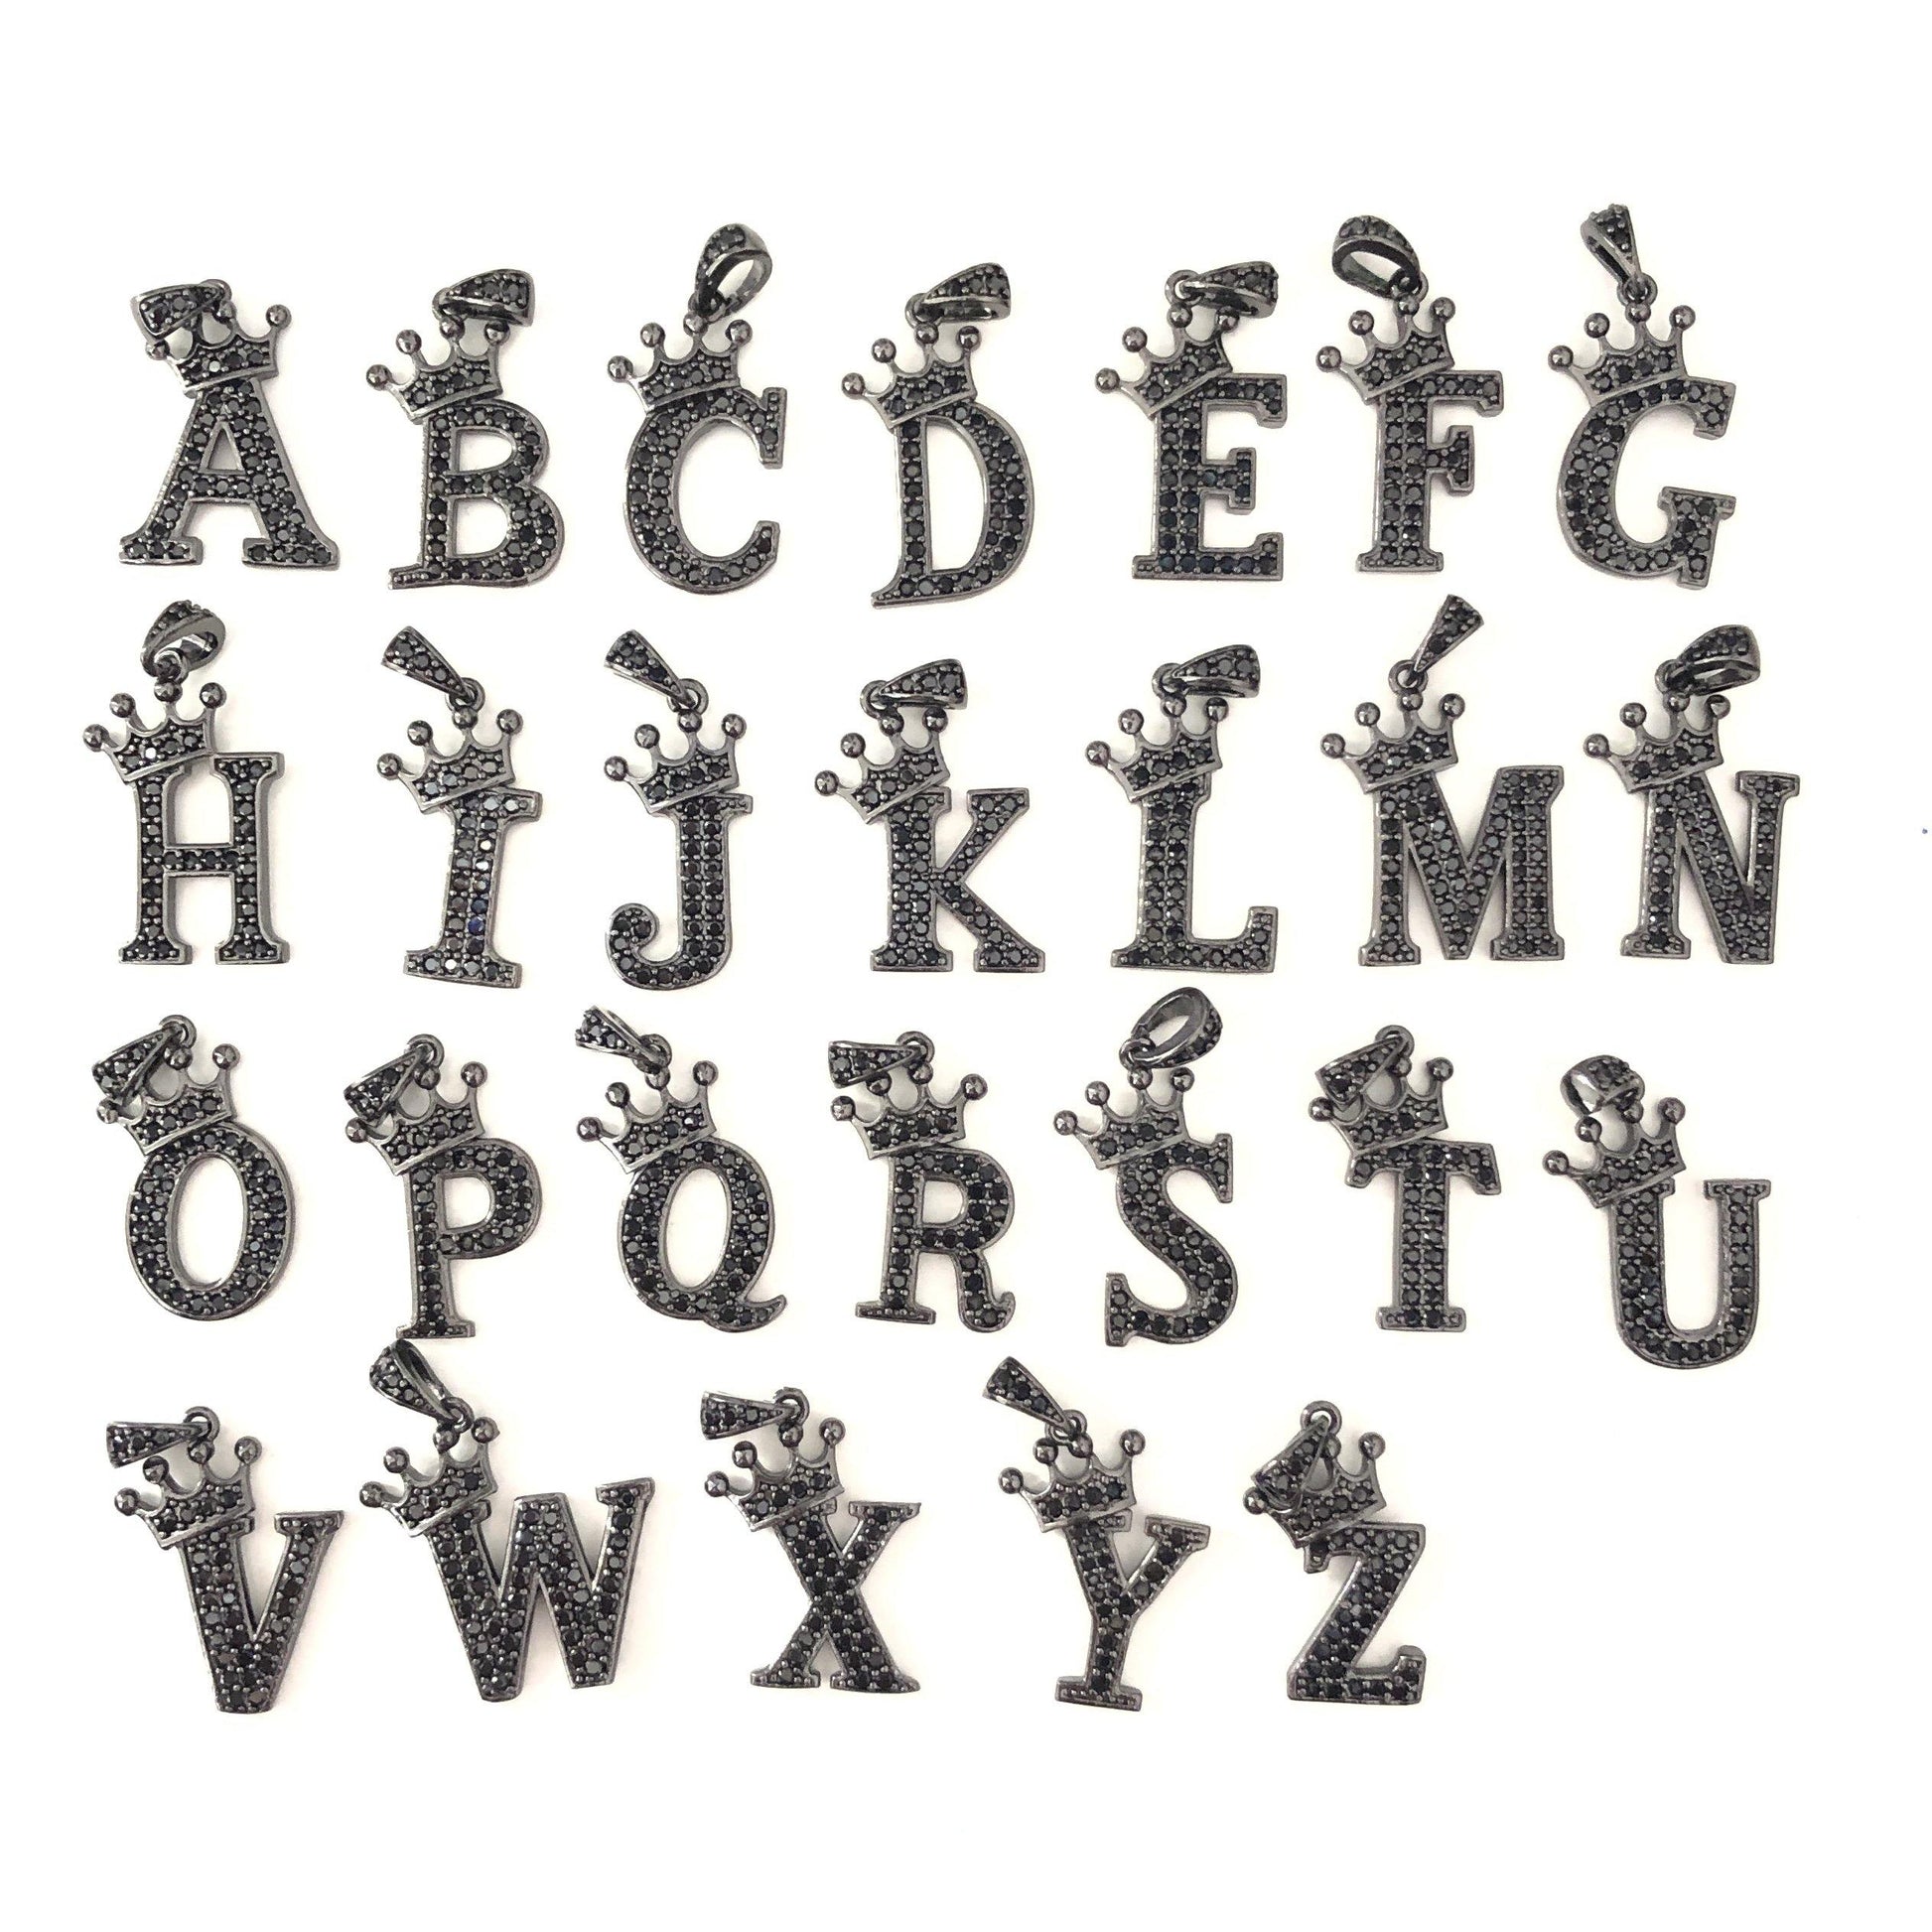 26pcs/lot 20mm CZ Paved Crown Initial Letter Alphabet Charms Black on Black, 26pcs from A to Z CZ Paved Charms Initials & Numbers Charms Beads Beyond